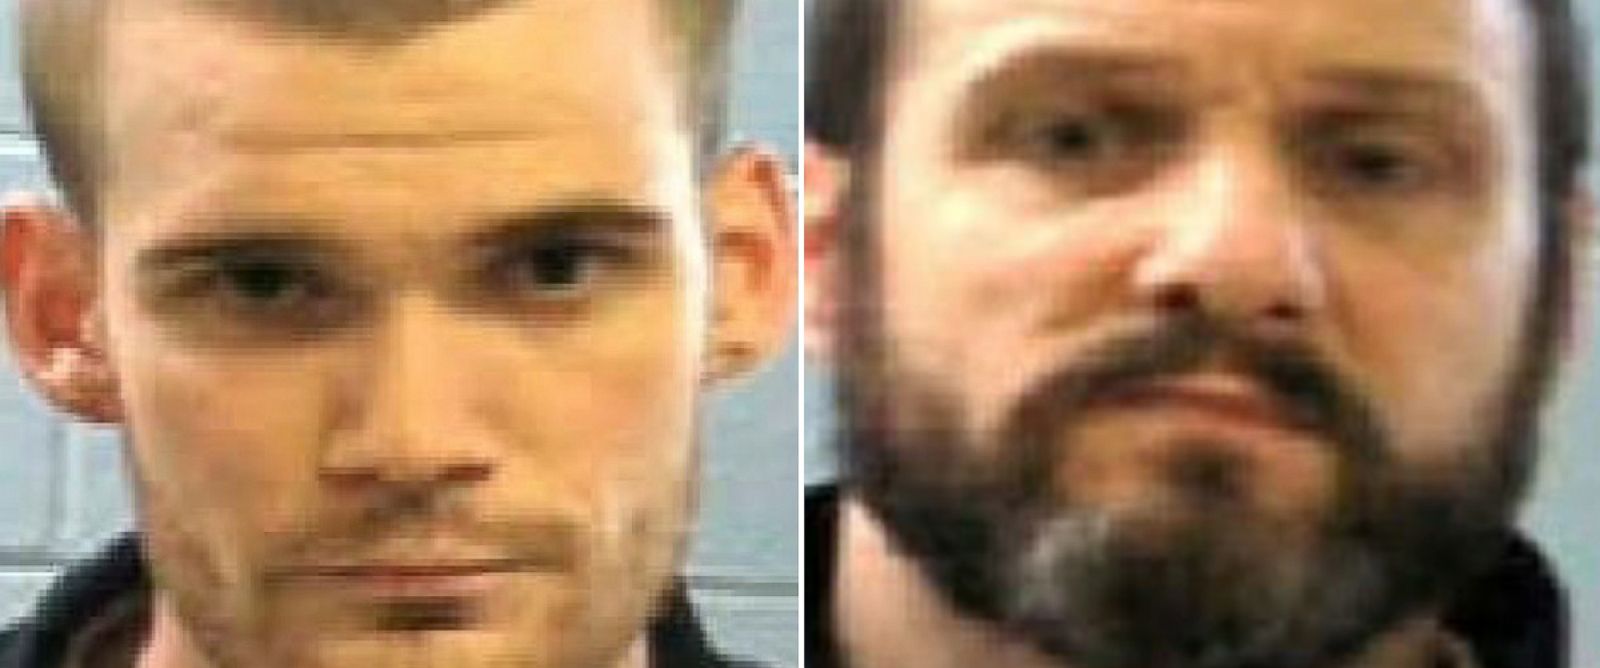 Escaped inmates captured in Tennessee, officials say ABC News